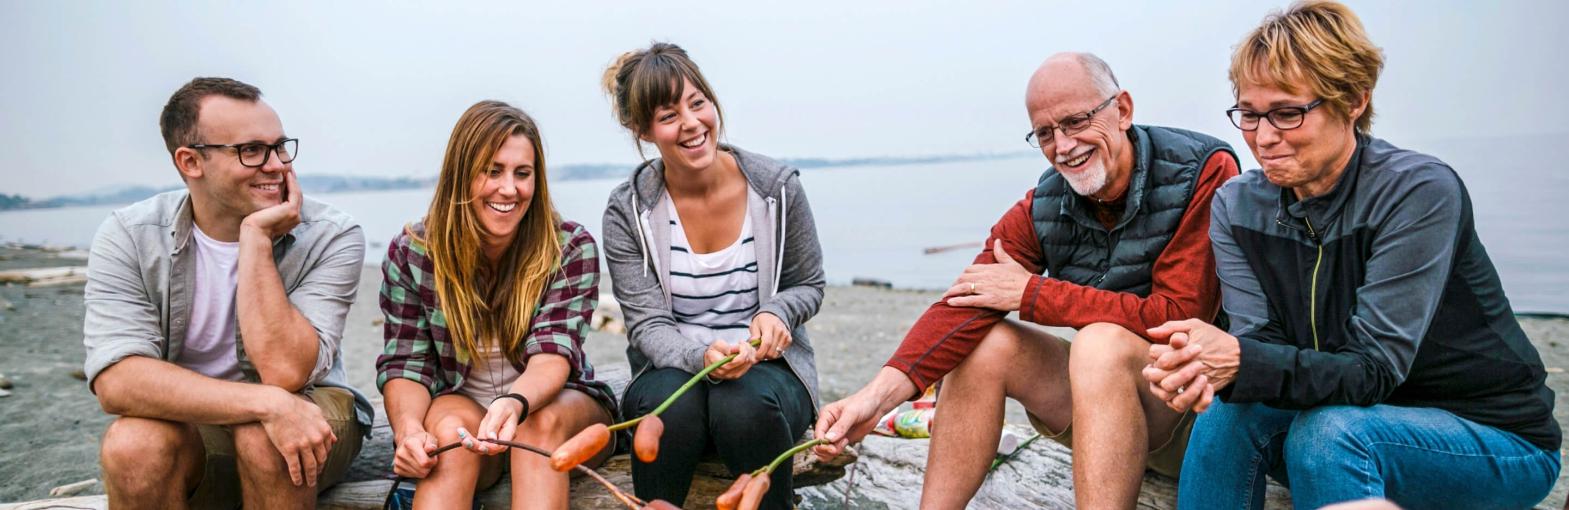 Image of family, three adult children, mother and father, sitting around fire on a beach with water in background